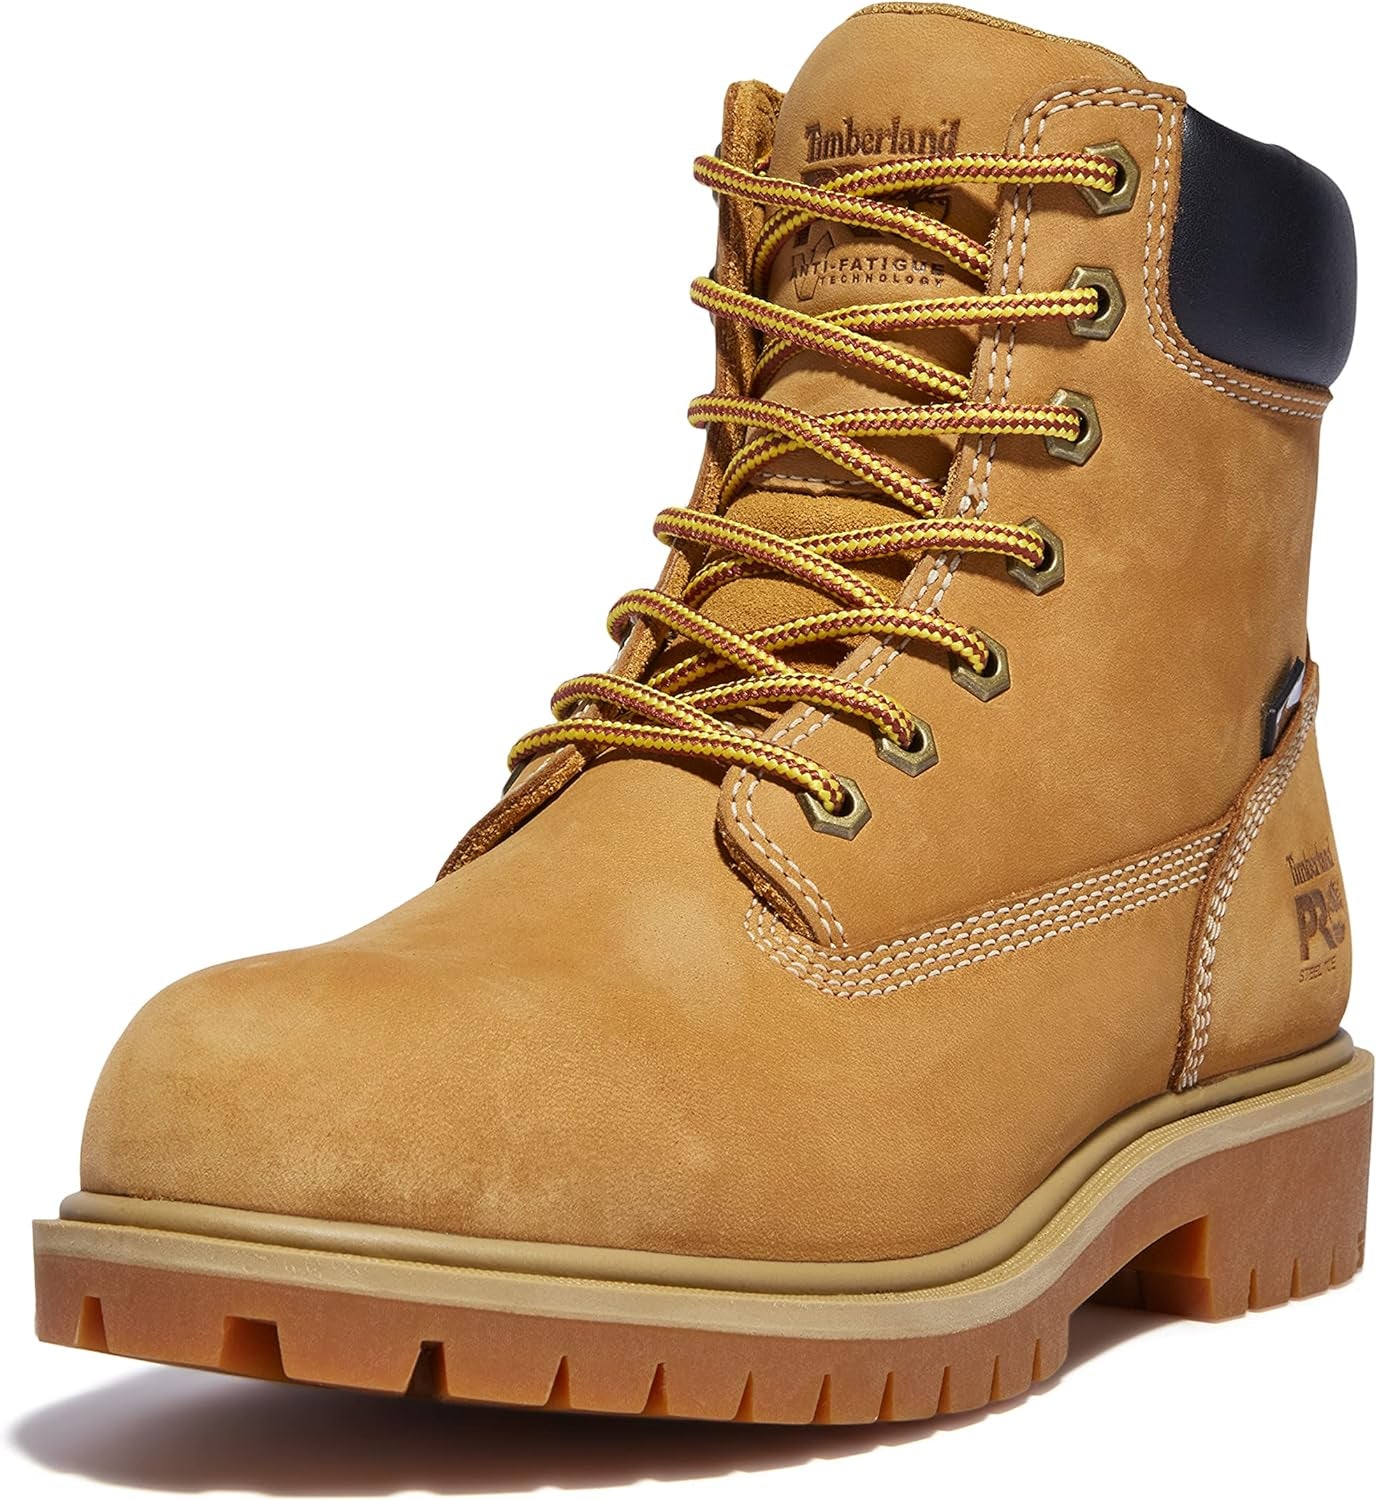 Men'S Direct Attach 6 Inch Soft Toe Insulated Waterproof Work Boot, Marigold